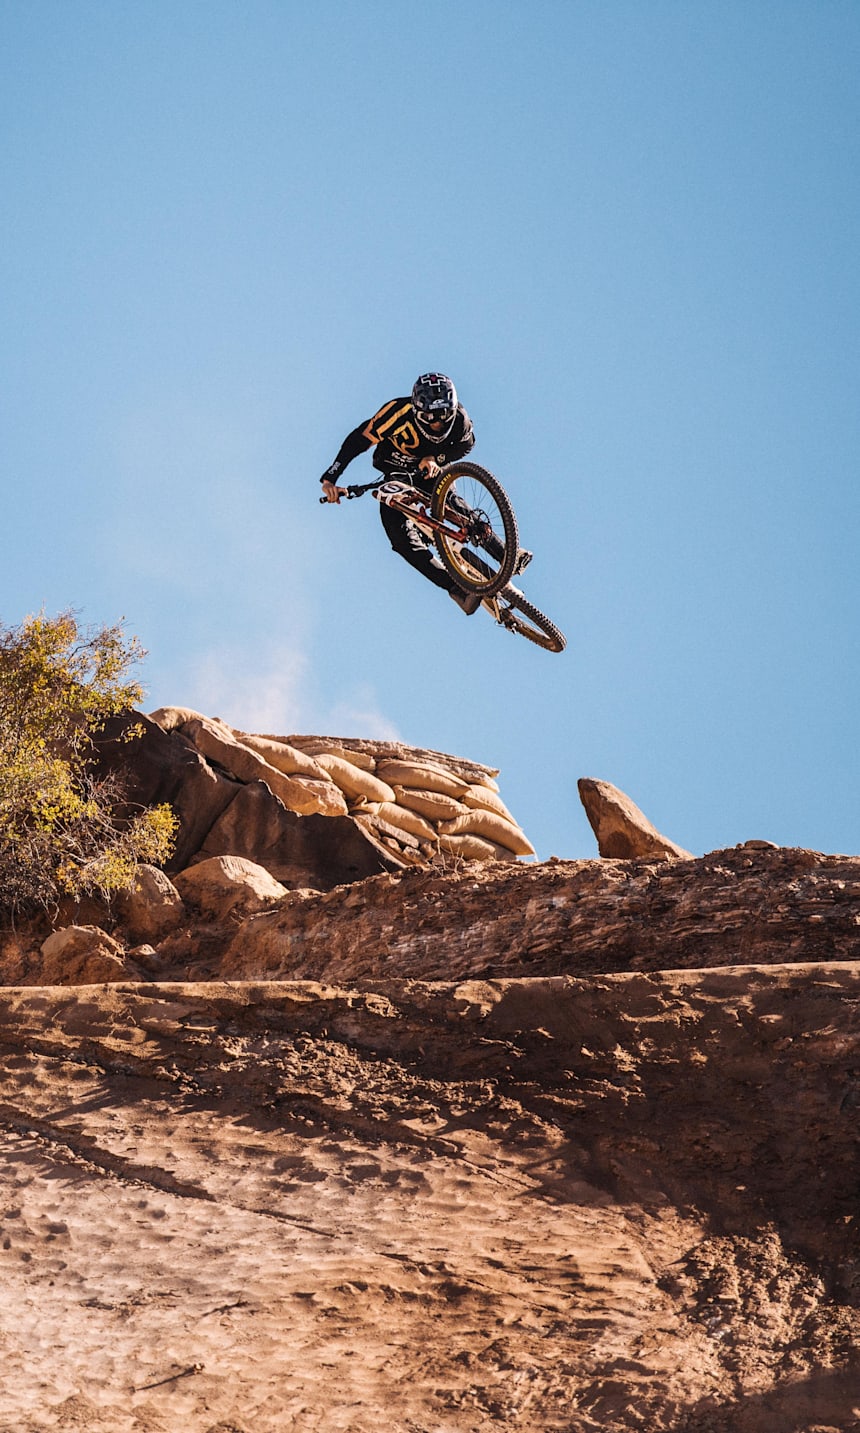 red bull rampage tickets